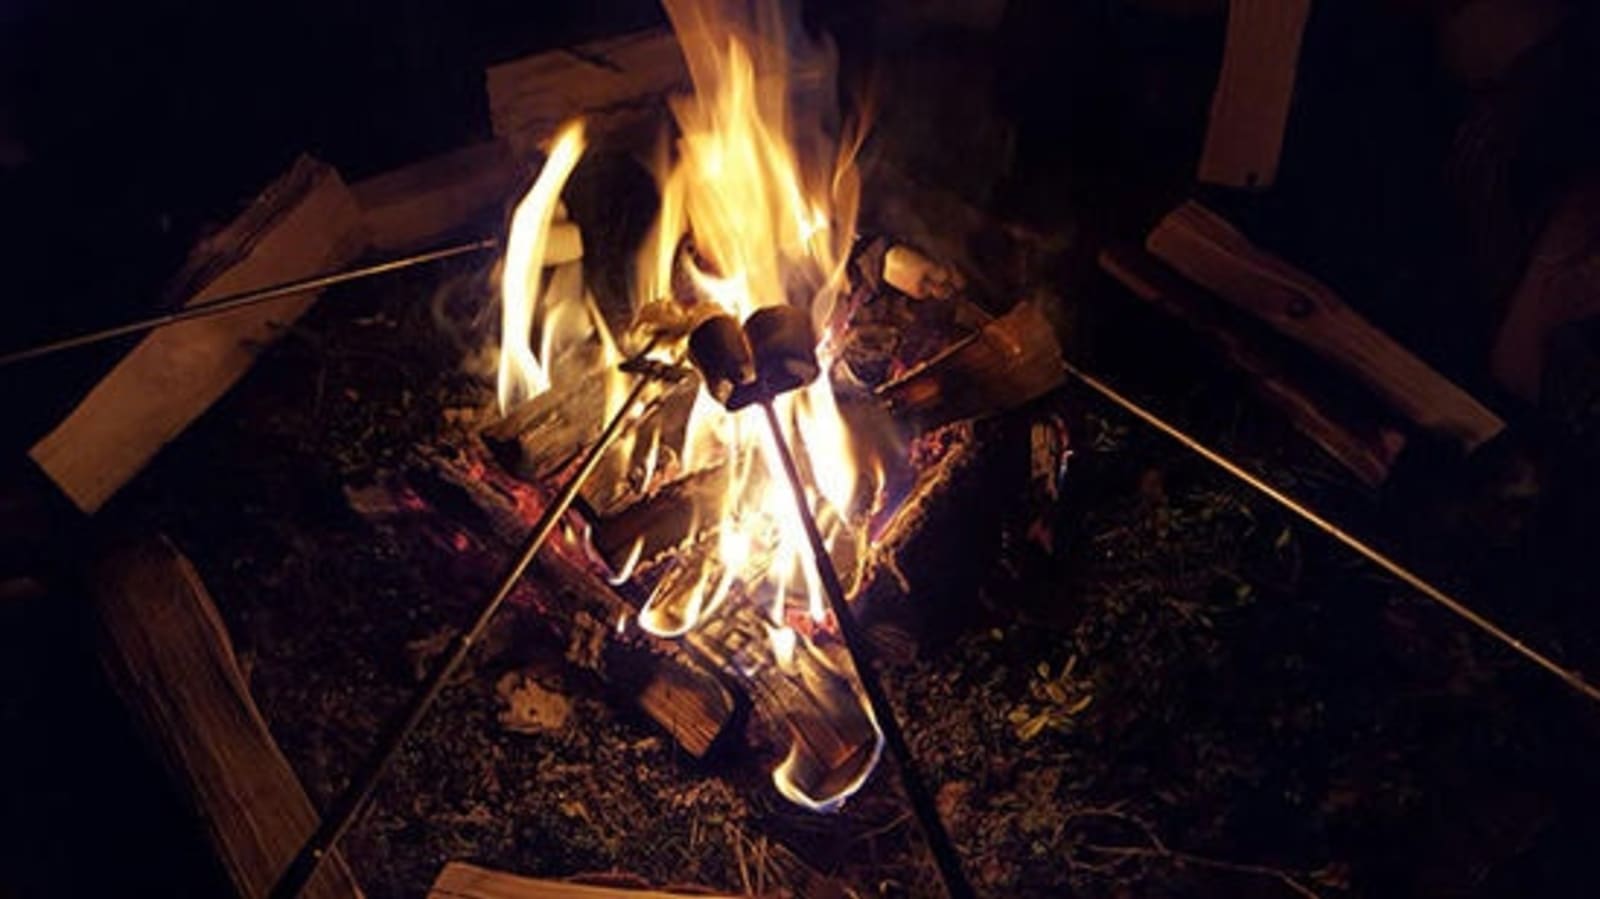 RS-Roasting-marshmallows-on-the-campfire.jpg